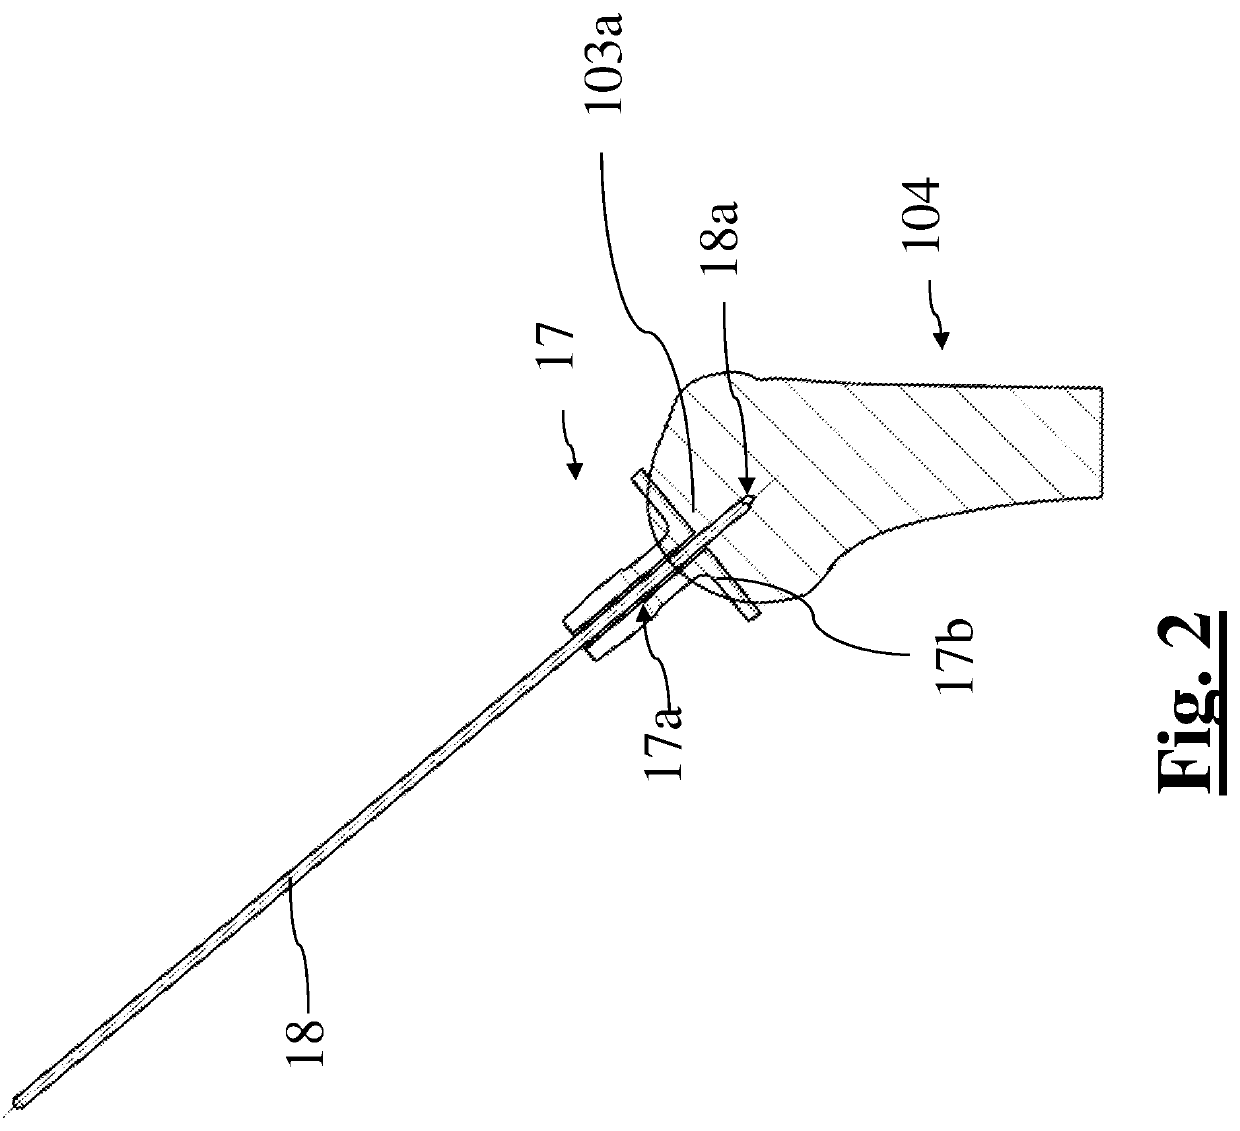 Method for surgical application of a glenoid prosthesis component of a shoulder joint prosthesis and relating surgical instruments